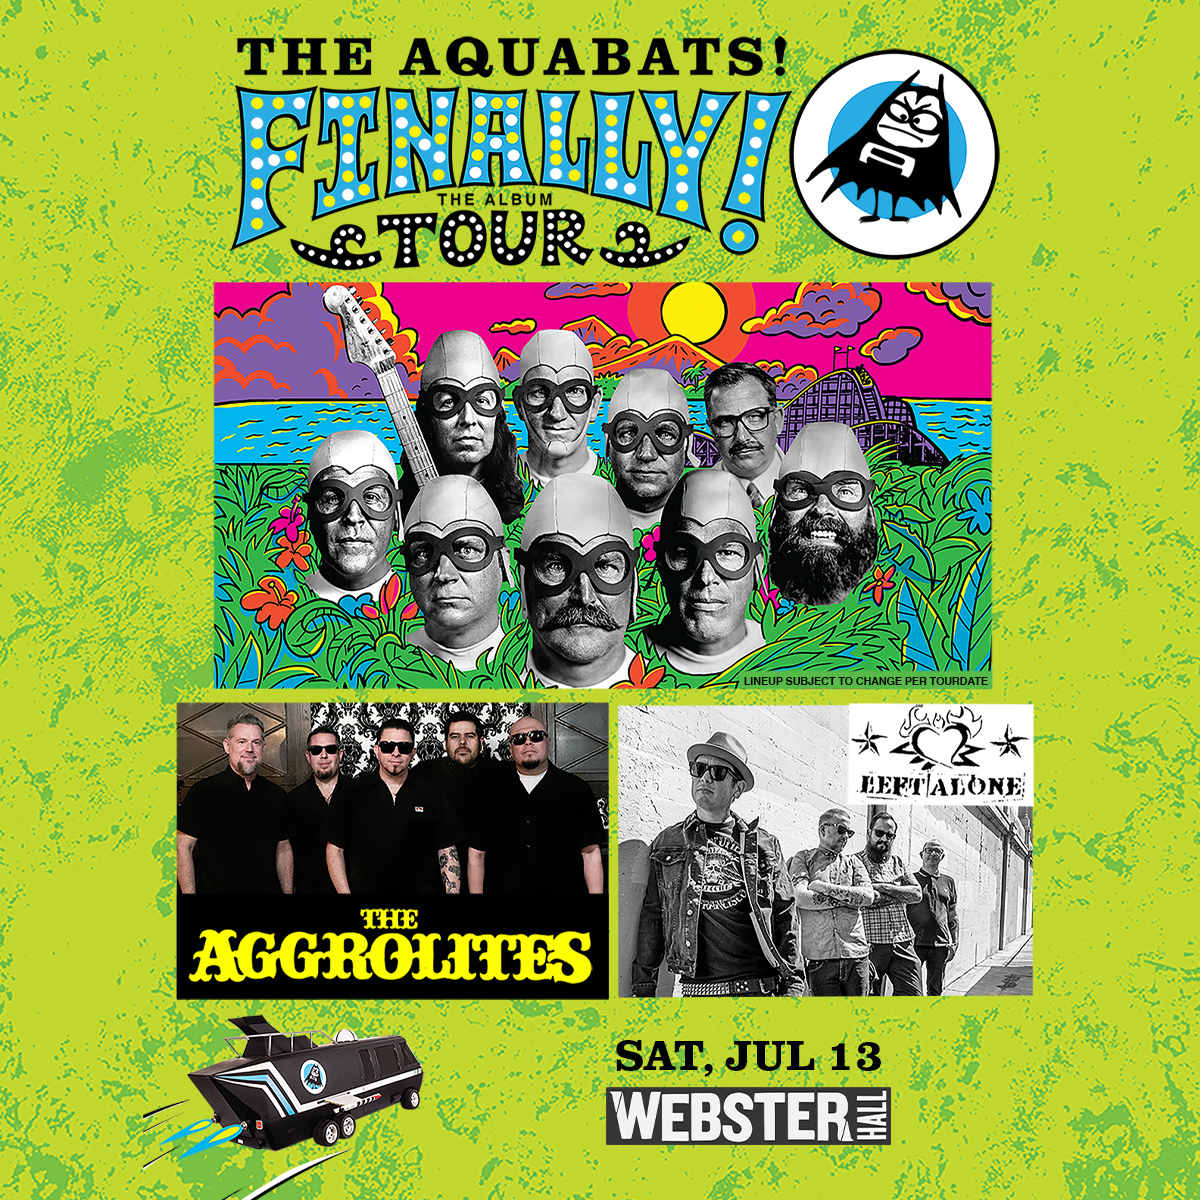 JUST ANNOUNCED: The Aquabats! will be here on sat, jul 13 with special guests Aggrolites and Left Alone 🌌 tickets go on sale friday at 10am